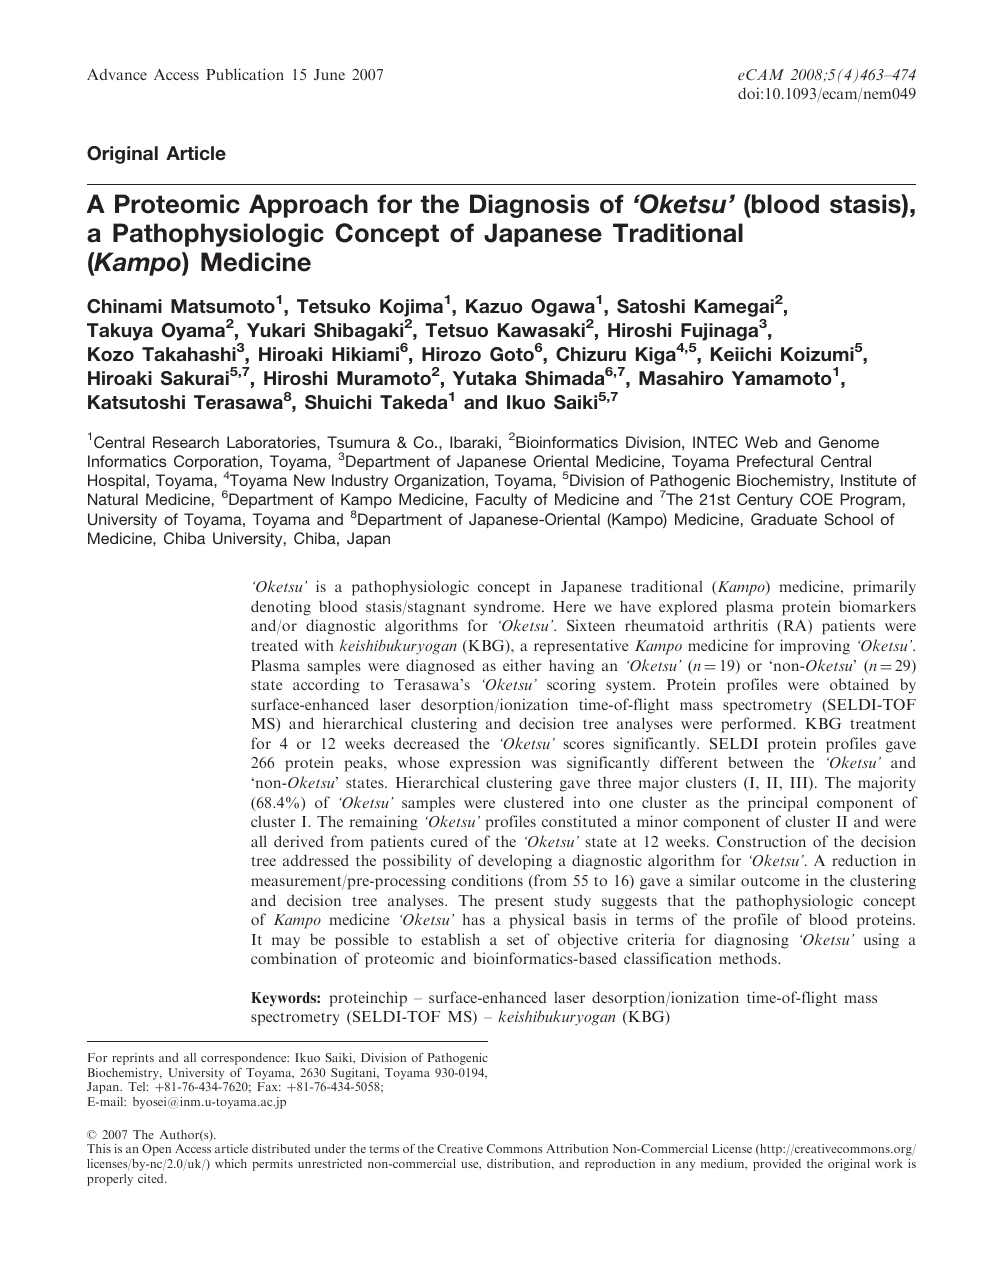 A Proteomic Approach For The Diagnosis Of Oketsu Blood Stasis A Pathophysiologic Concept Of Japanese Traditional Kampo Medicine Topic Of Research Paper In Clinical Medicine Download Scholarly Article Pdf